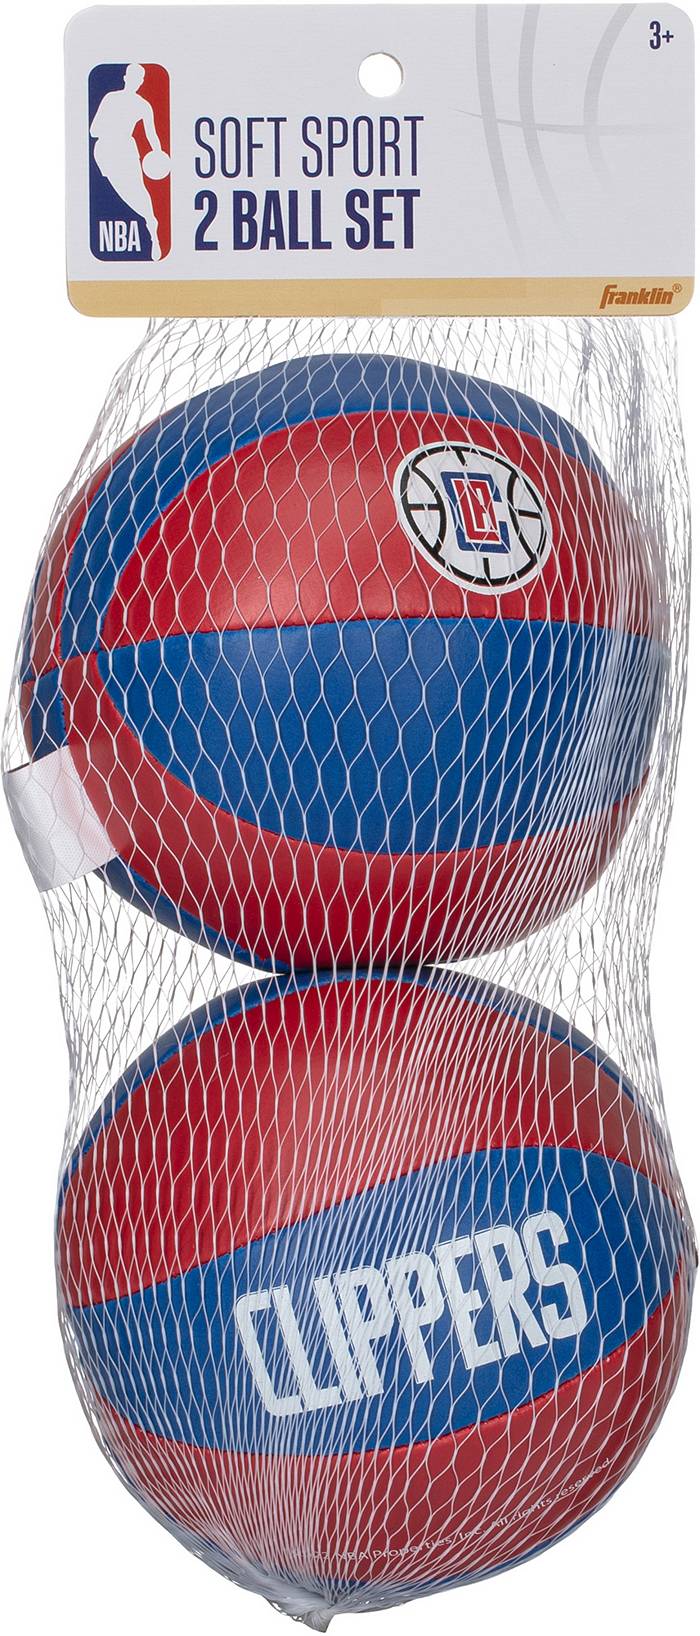 Los Angeles Clippers Apparel & Gear  Curbside Pickup Available at DICK'S